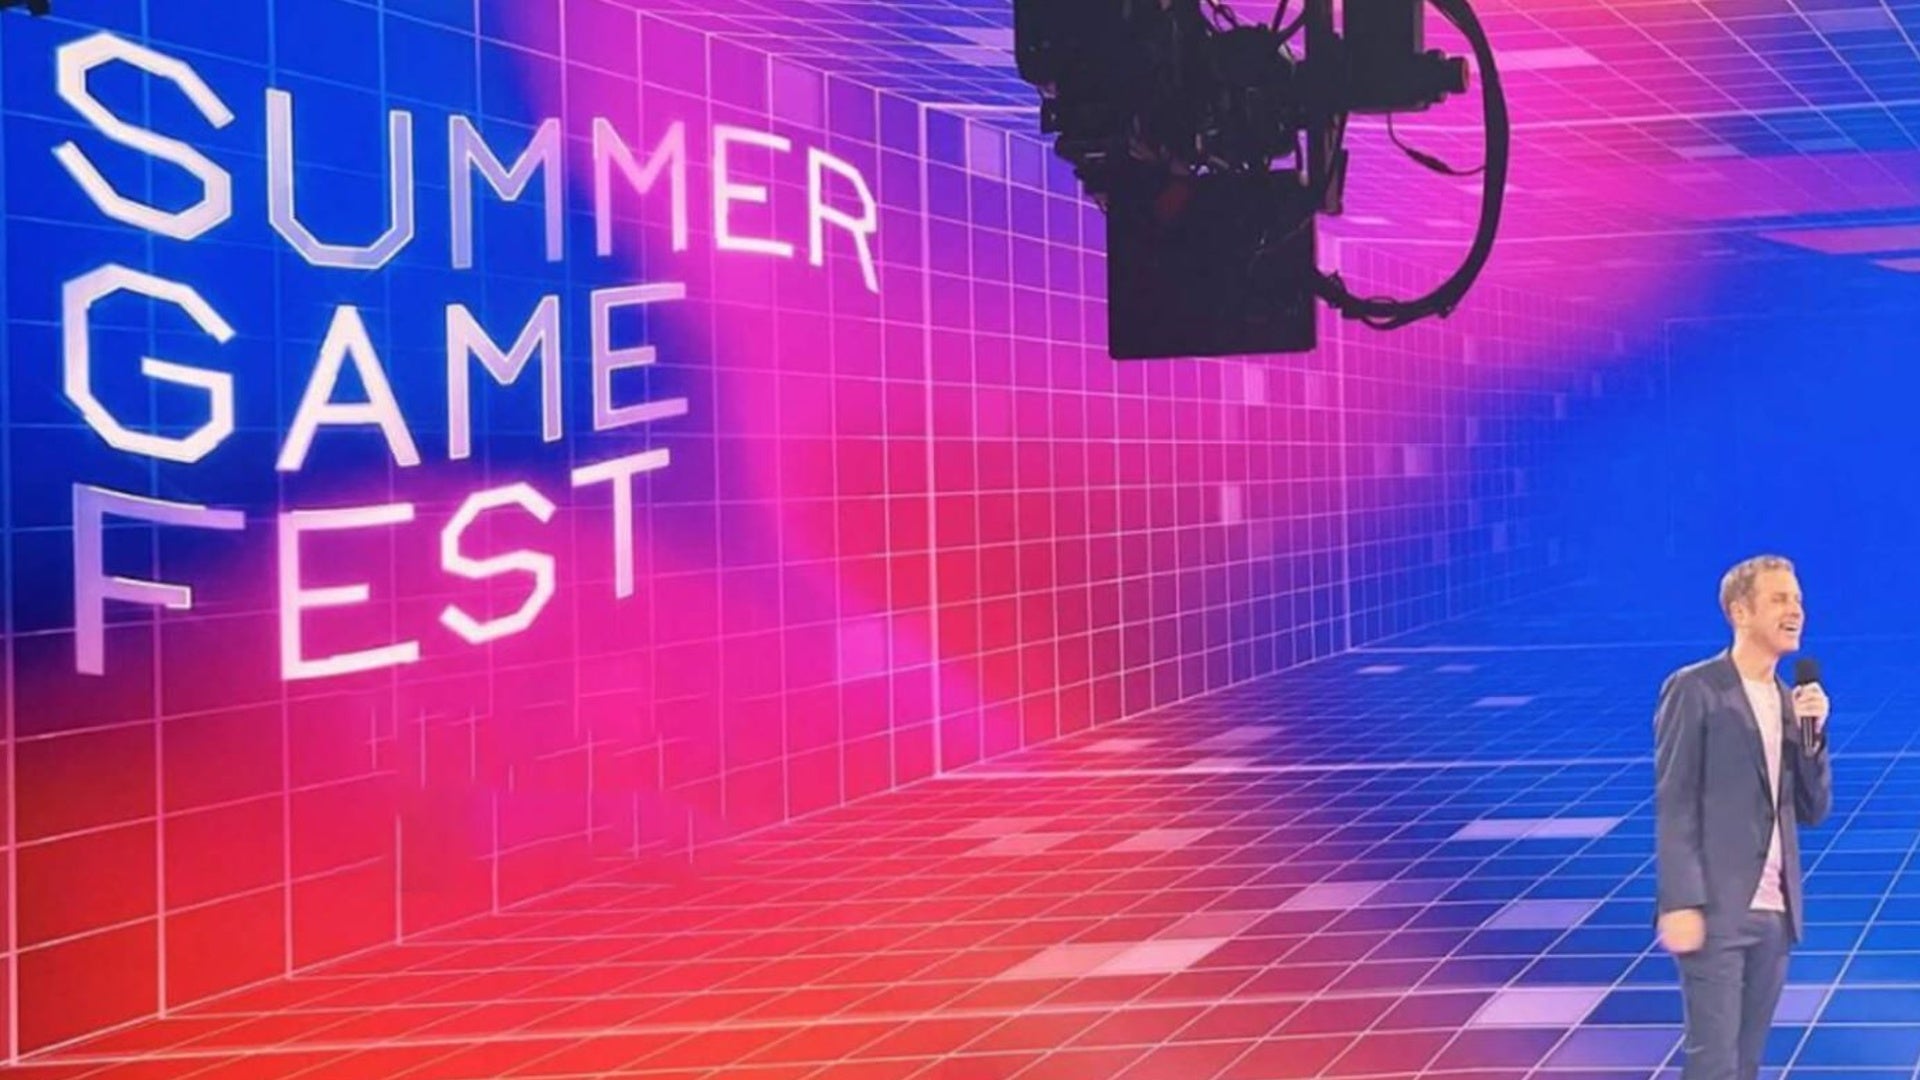 Summer Game Fest is an annual event showcasing new games that takes place in June, hosted by Geoff Keighley